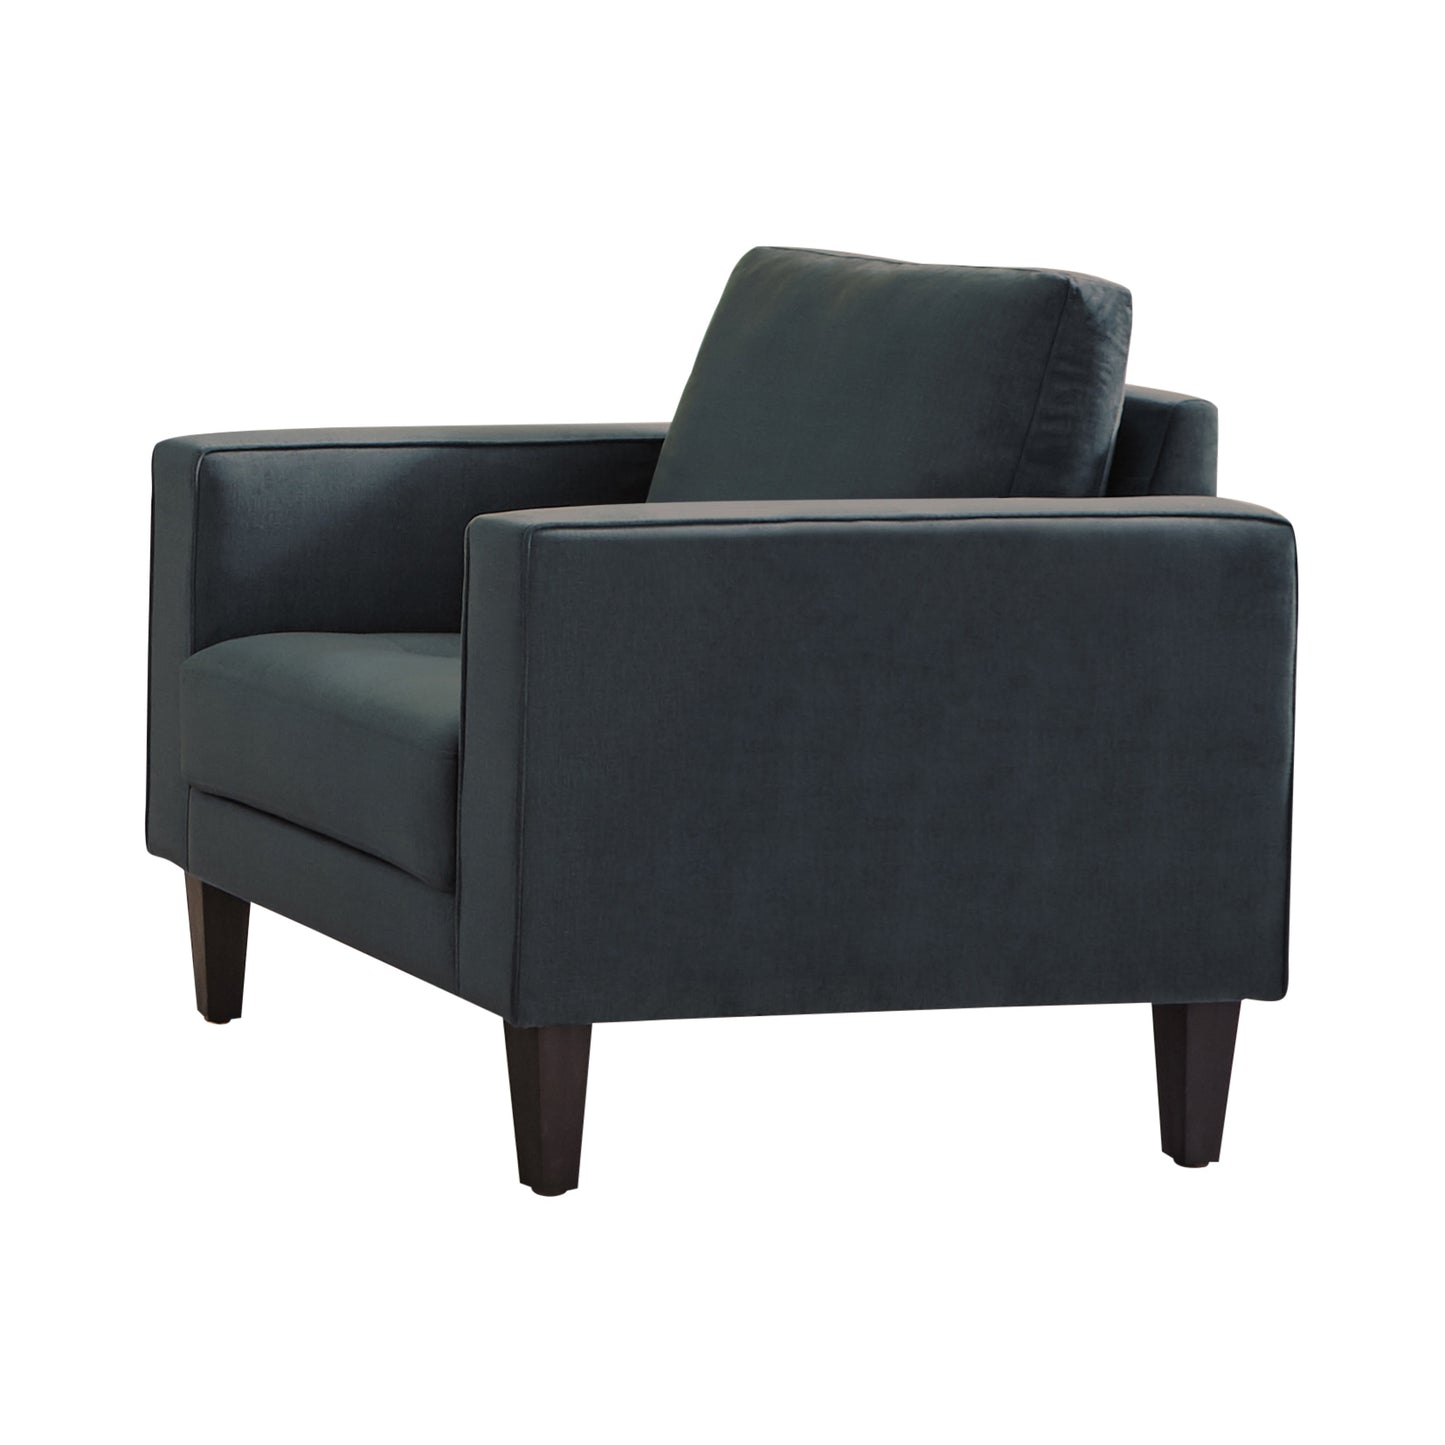 Gulfdale Cushion Back Upholstered Chair Dark Teal